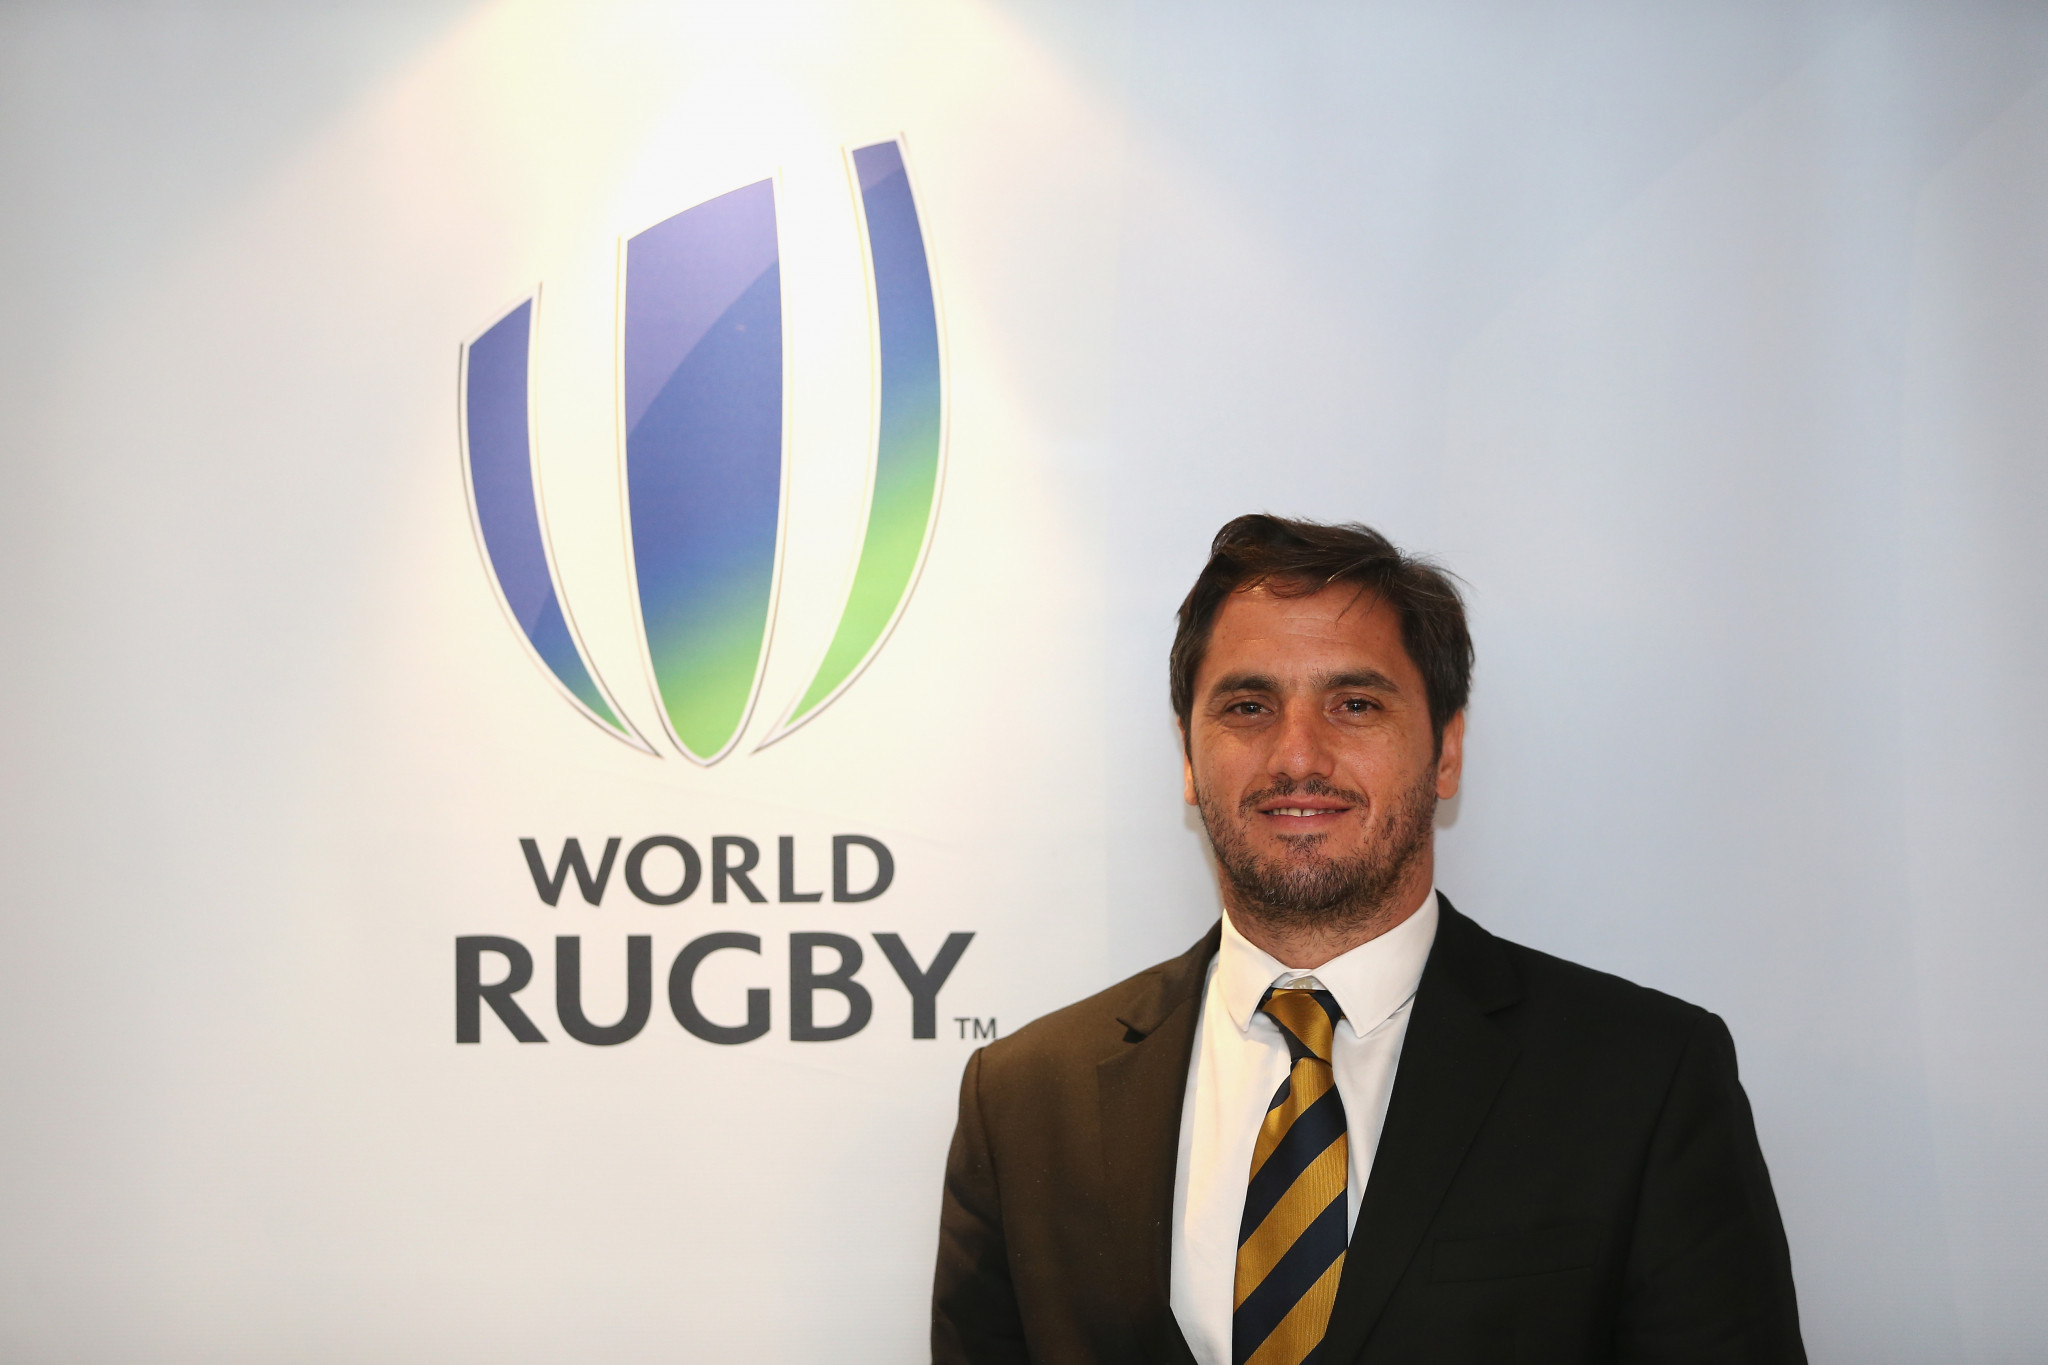 It has been reported that Agustín Pichot may have caused a split in the Six Nations vote bloc for the World Rugby election ©Getty Images